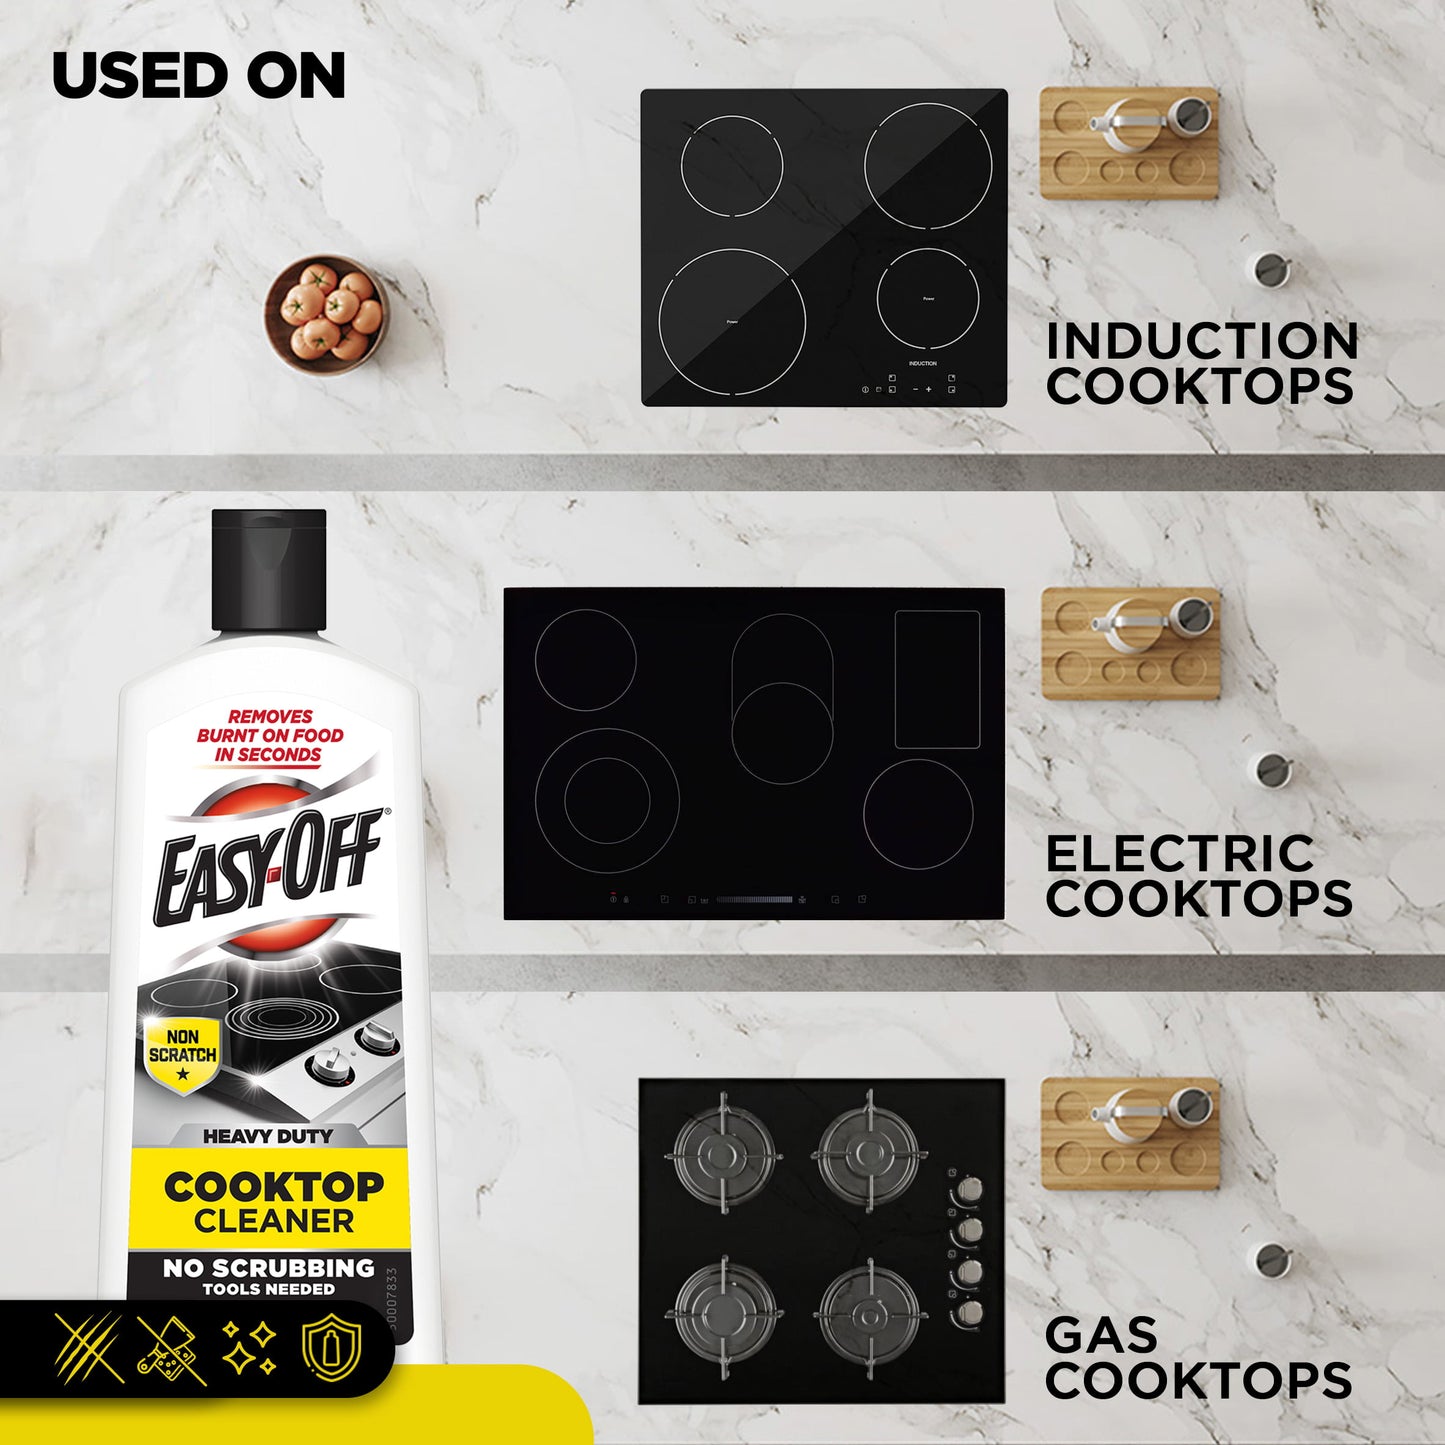 Easy Off Heavy Duty Cooktop Cleaner, Removes Burnt on Food in Seconds, Non-Scratch, No Scrubbing Tools Needed, 16 Oz